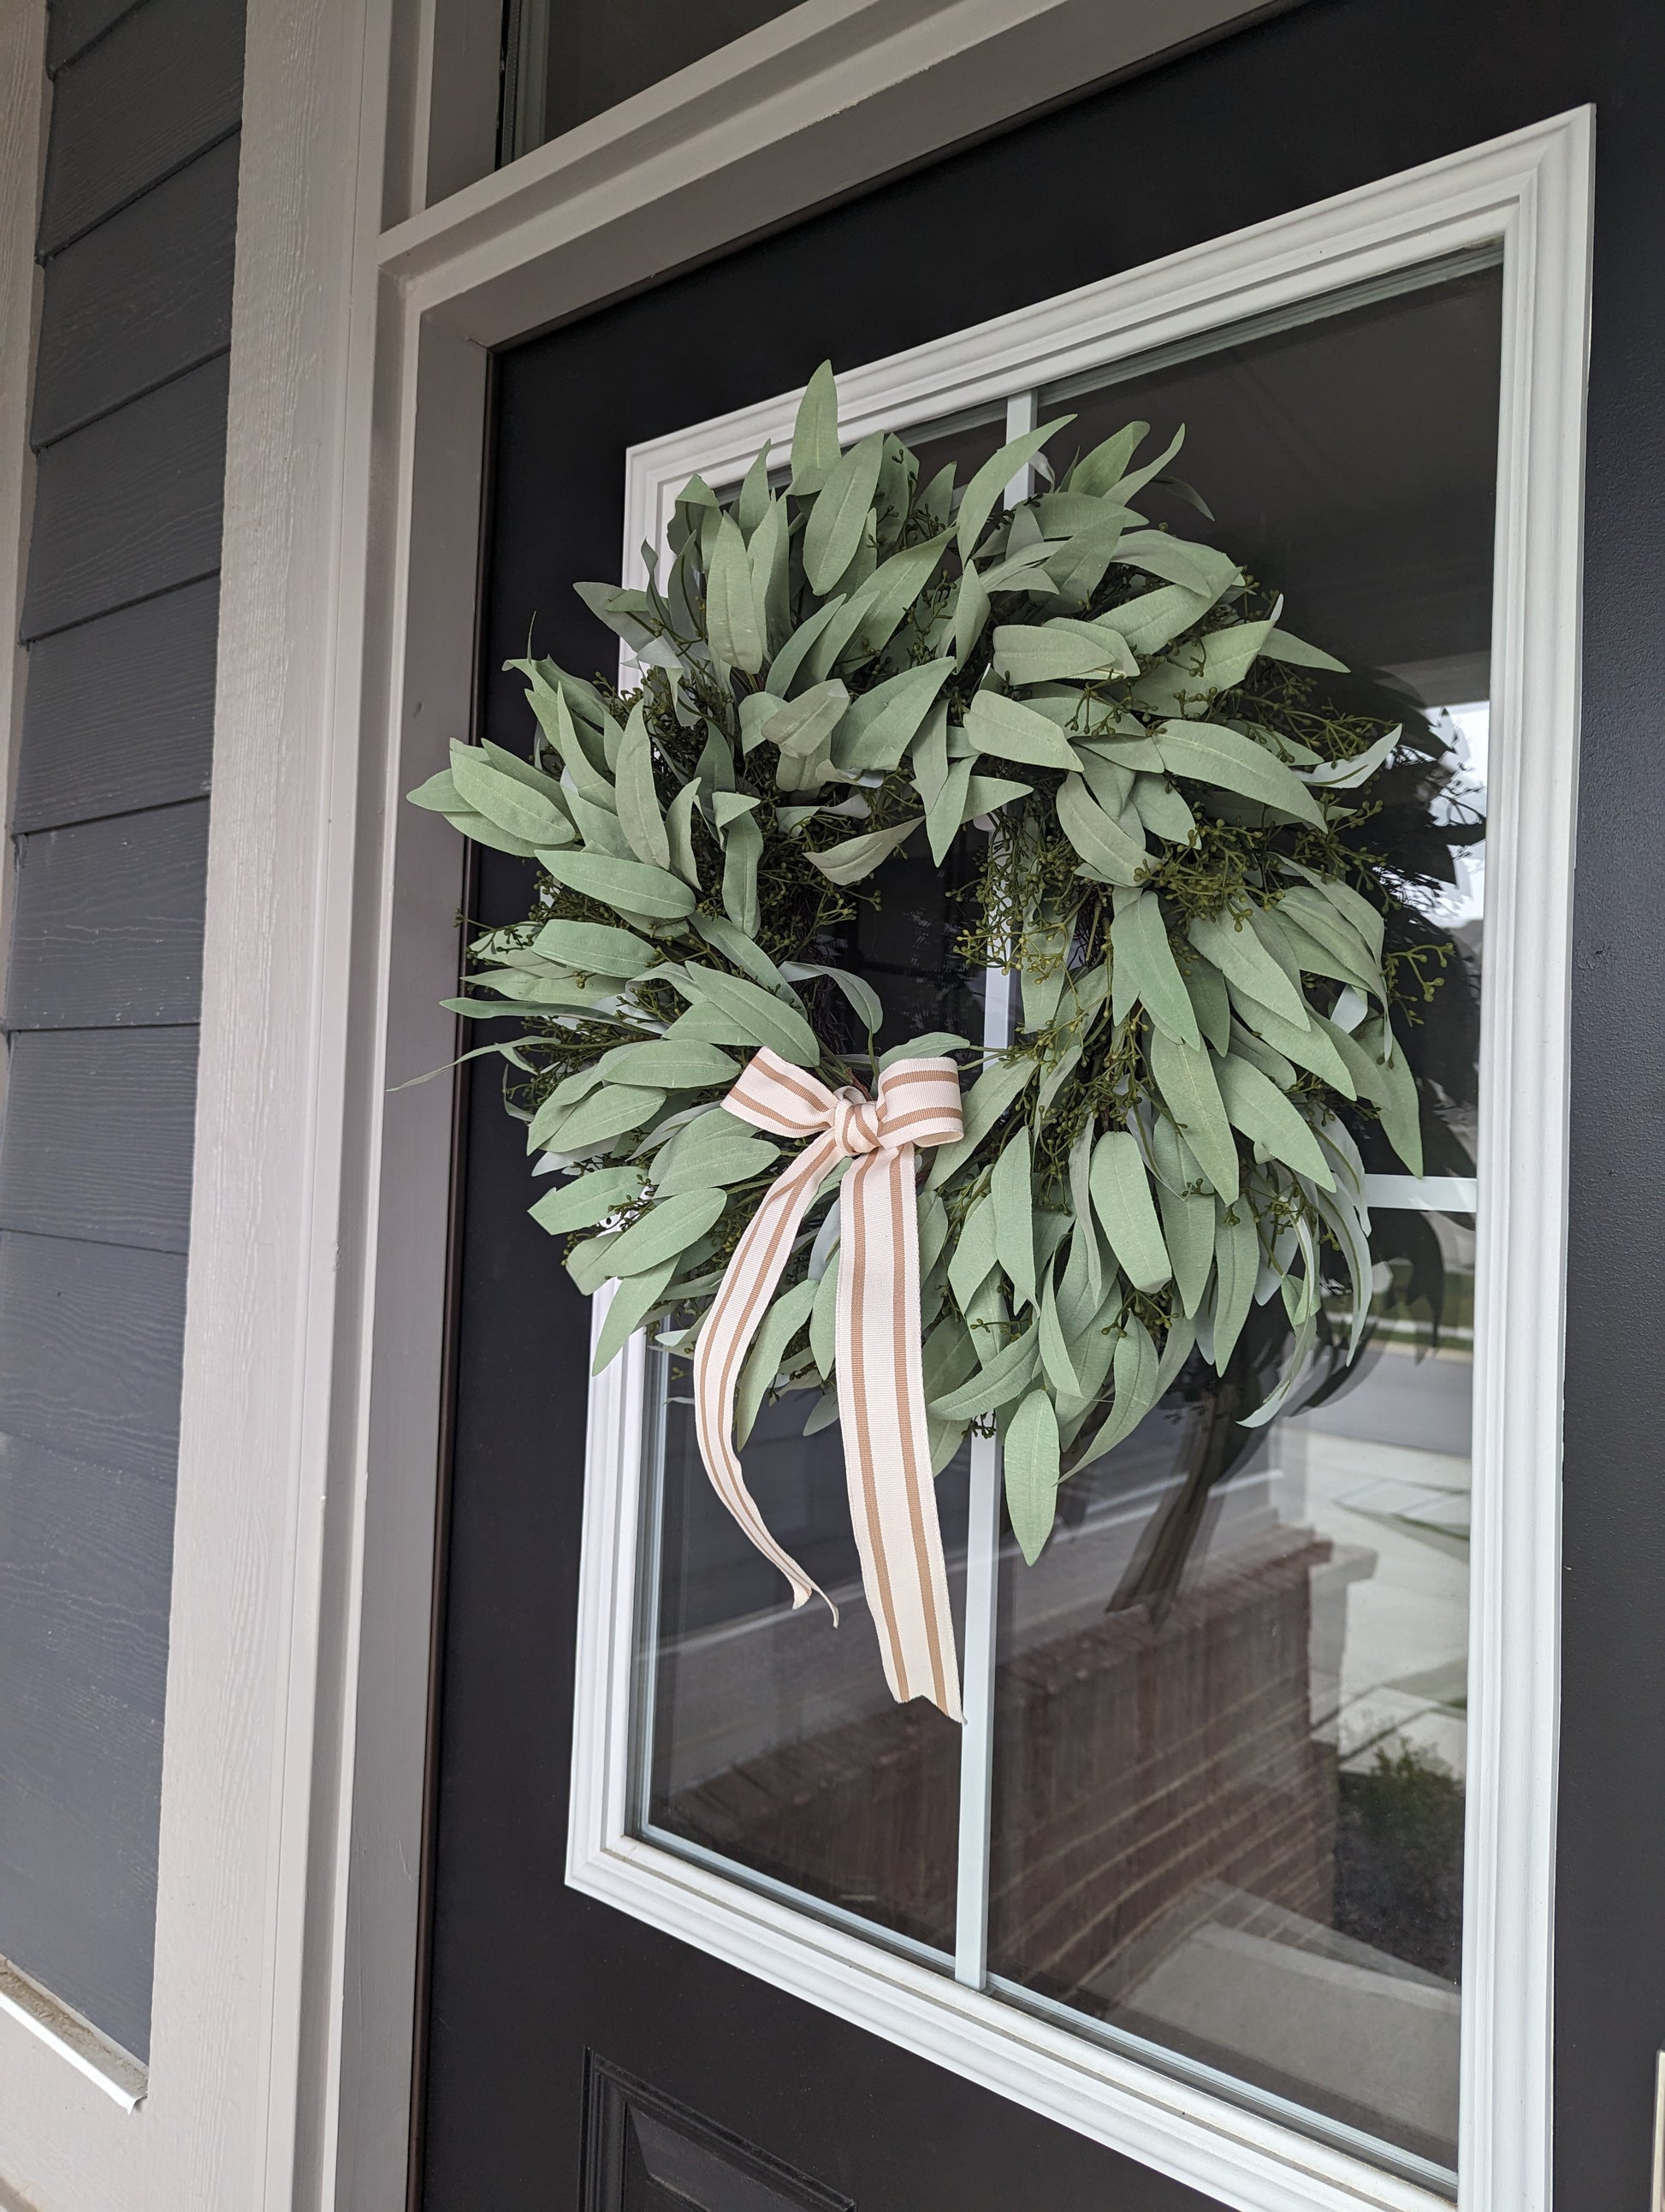 Decorate your front door with this beautiful 20-inch Artificial Seeded Eucalyptus Wreath, styled with a striped tan bow, perfect for adding a touch of lifelike greenery to your home decor this spring and summer season. This artificial wreath is a low-maintenance, long-lasting solution that looks just like the real thing. It's a perfect addition to your home decor.